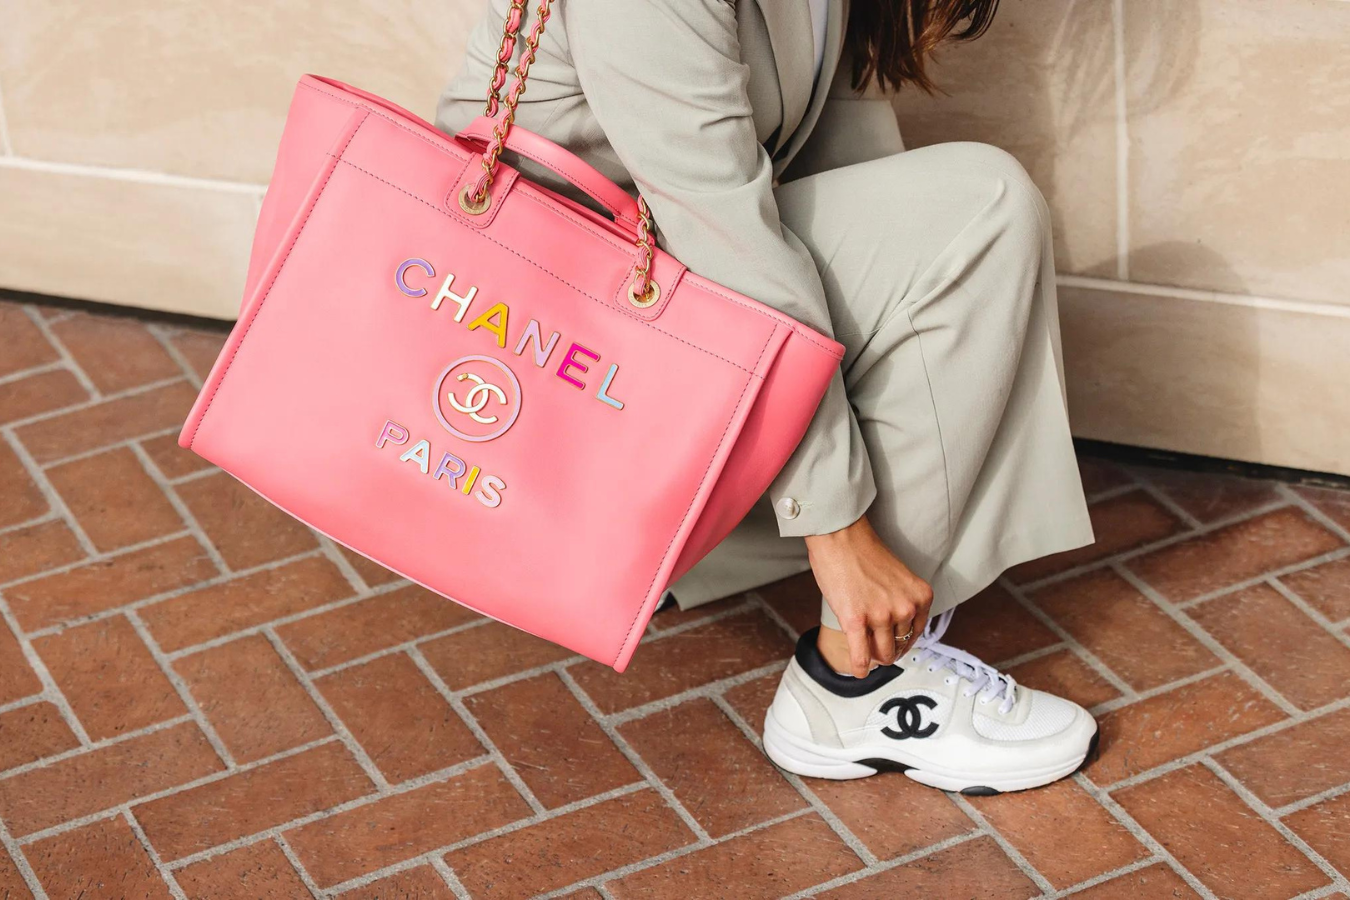 The Chanel Summer 2012 Tote Bag